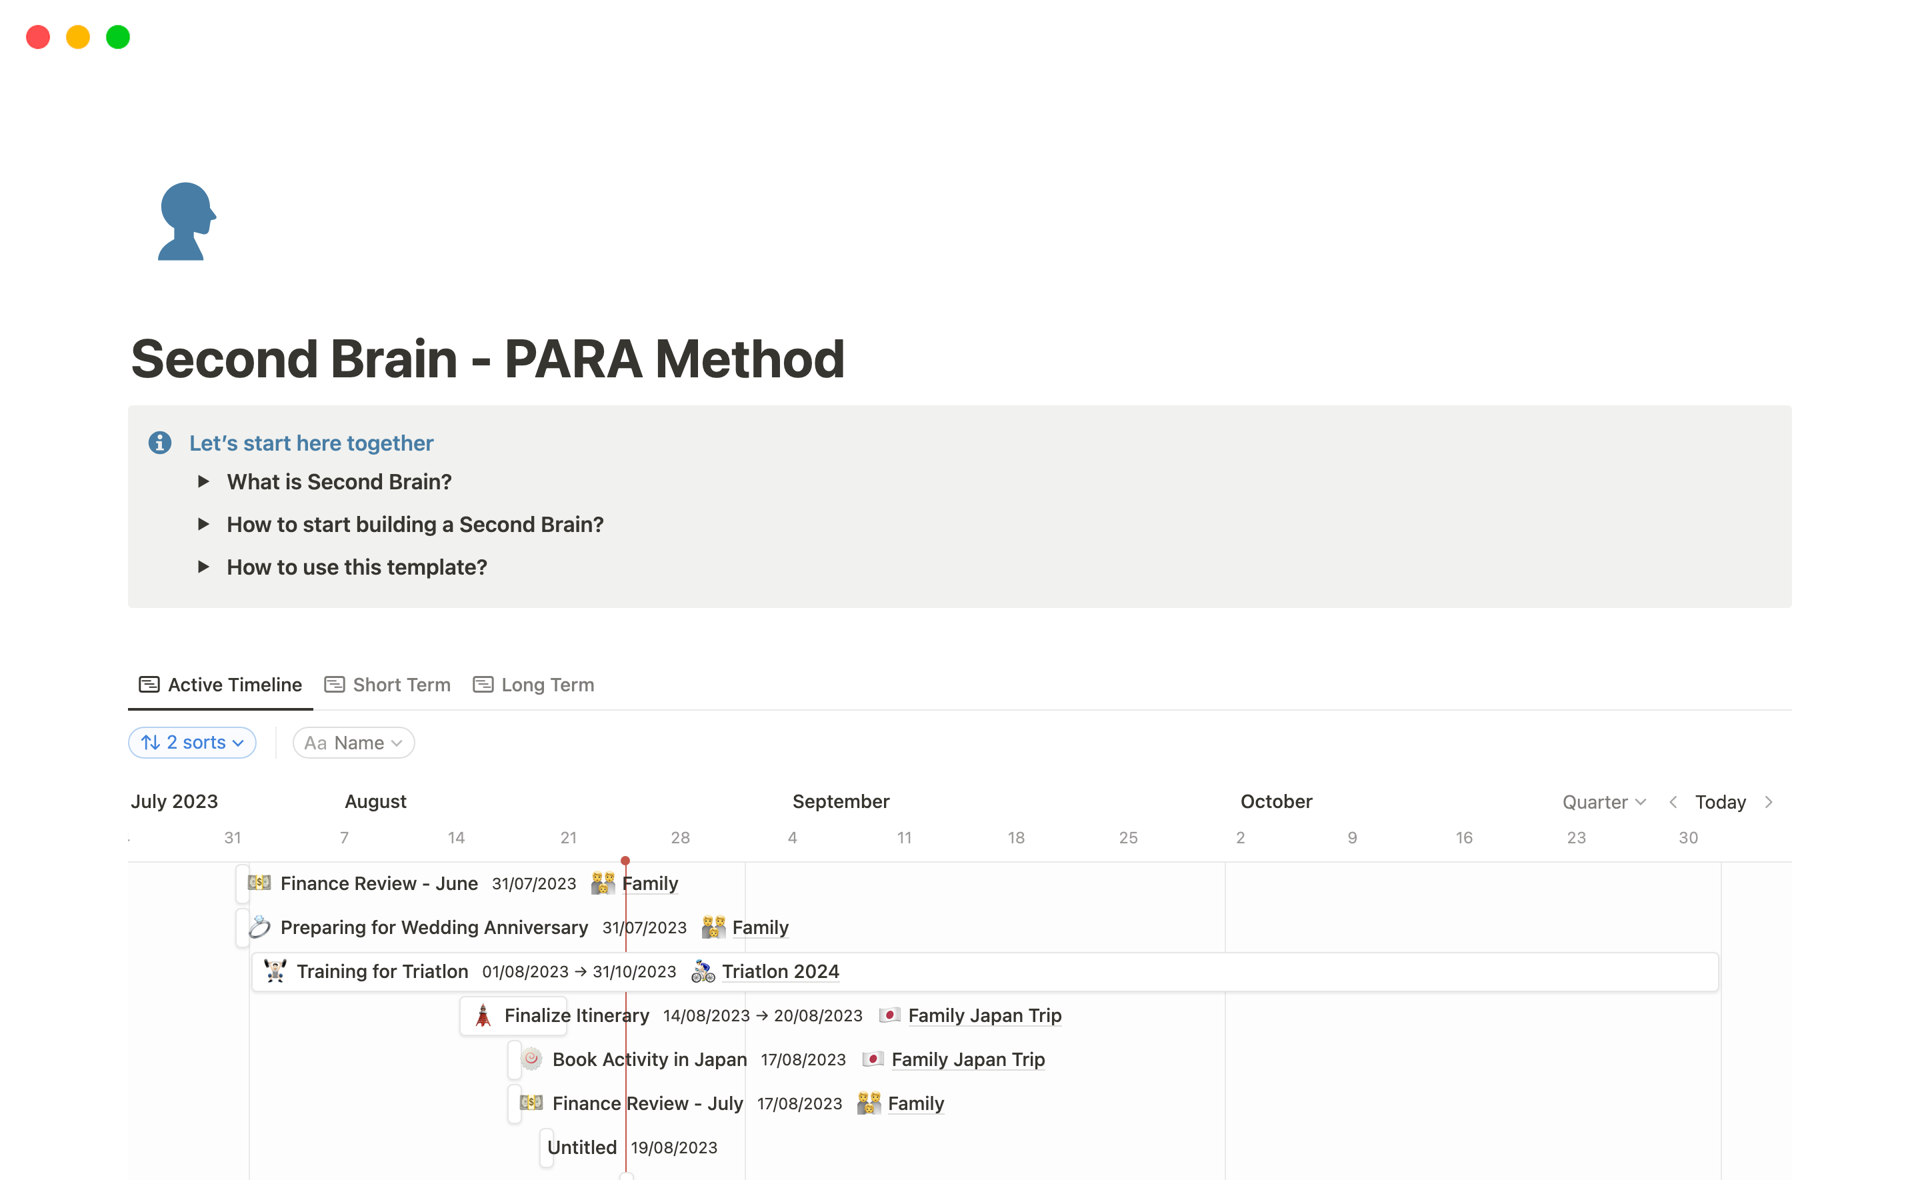 If you're looking to take your productivity to the next level, look no further than our Notion Template Second Brain using the PARA Method. 